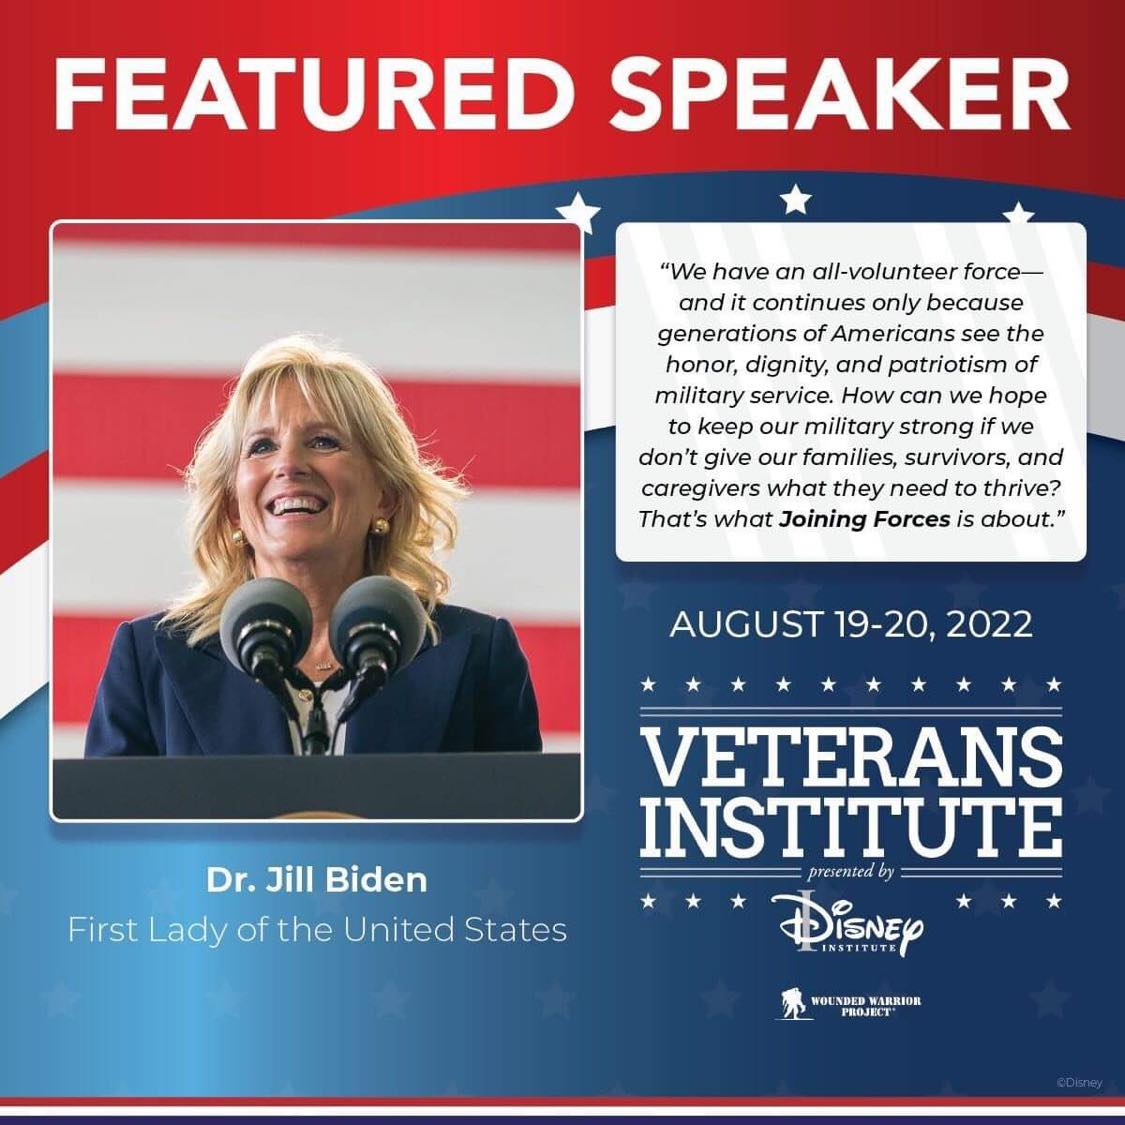 First Lady Jill Biden to provide opening remarks at Disney’s Veterans Institute Summit